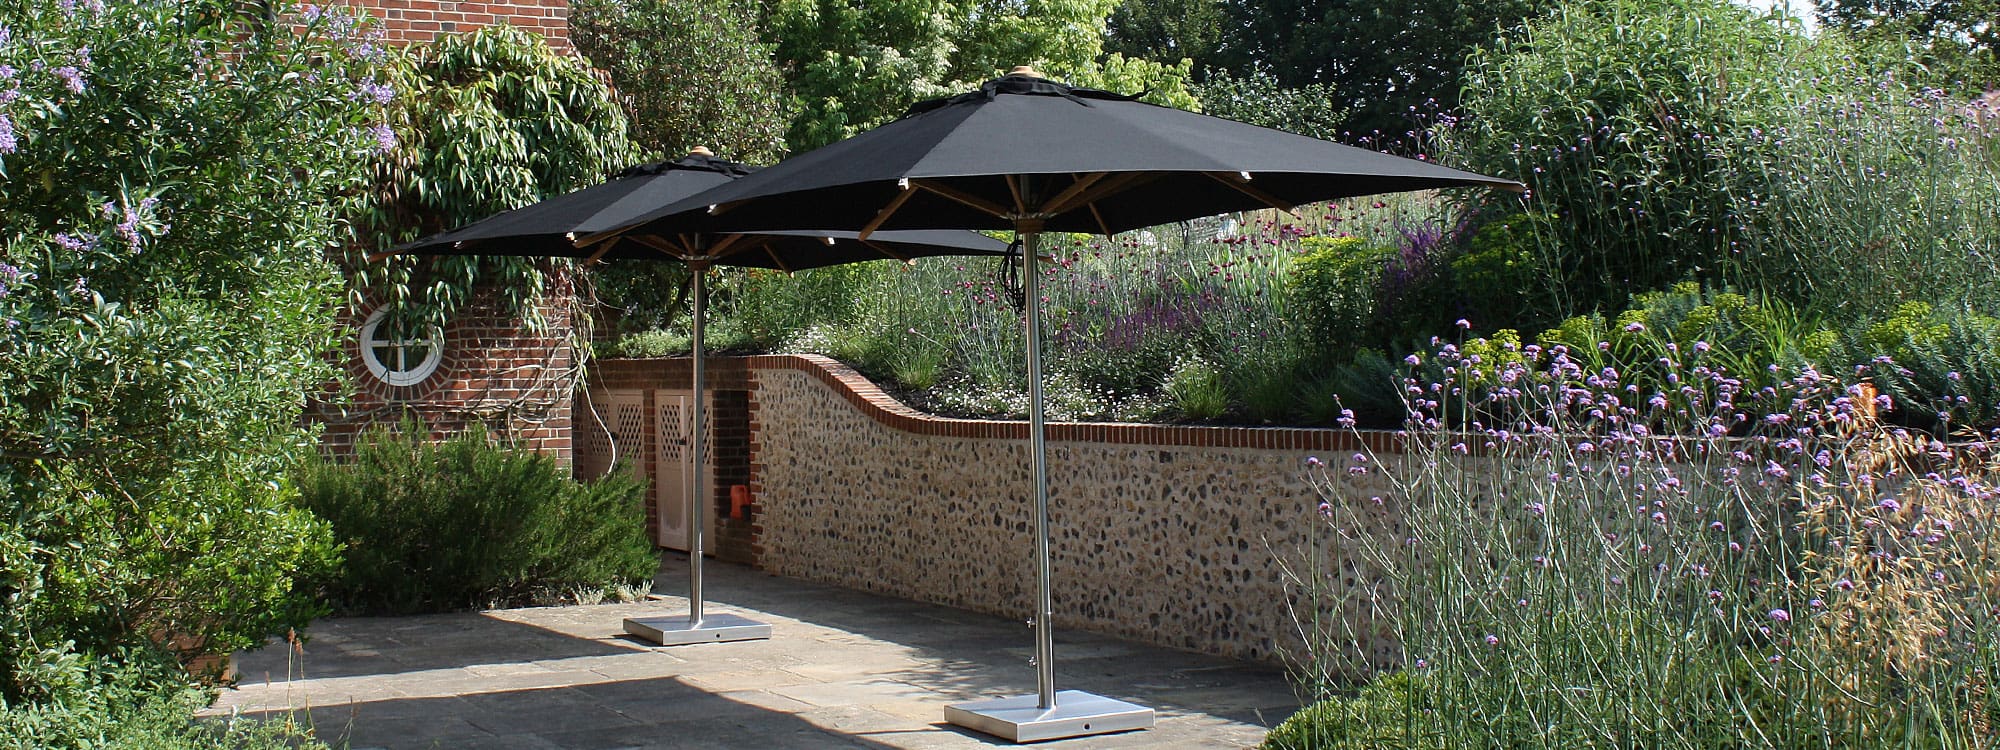 Image of pair of Royal Botania Shady parasols in Meon Valley garden in Hampshire